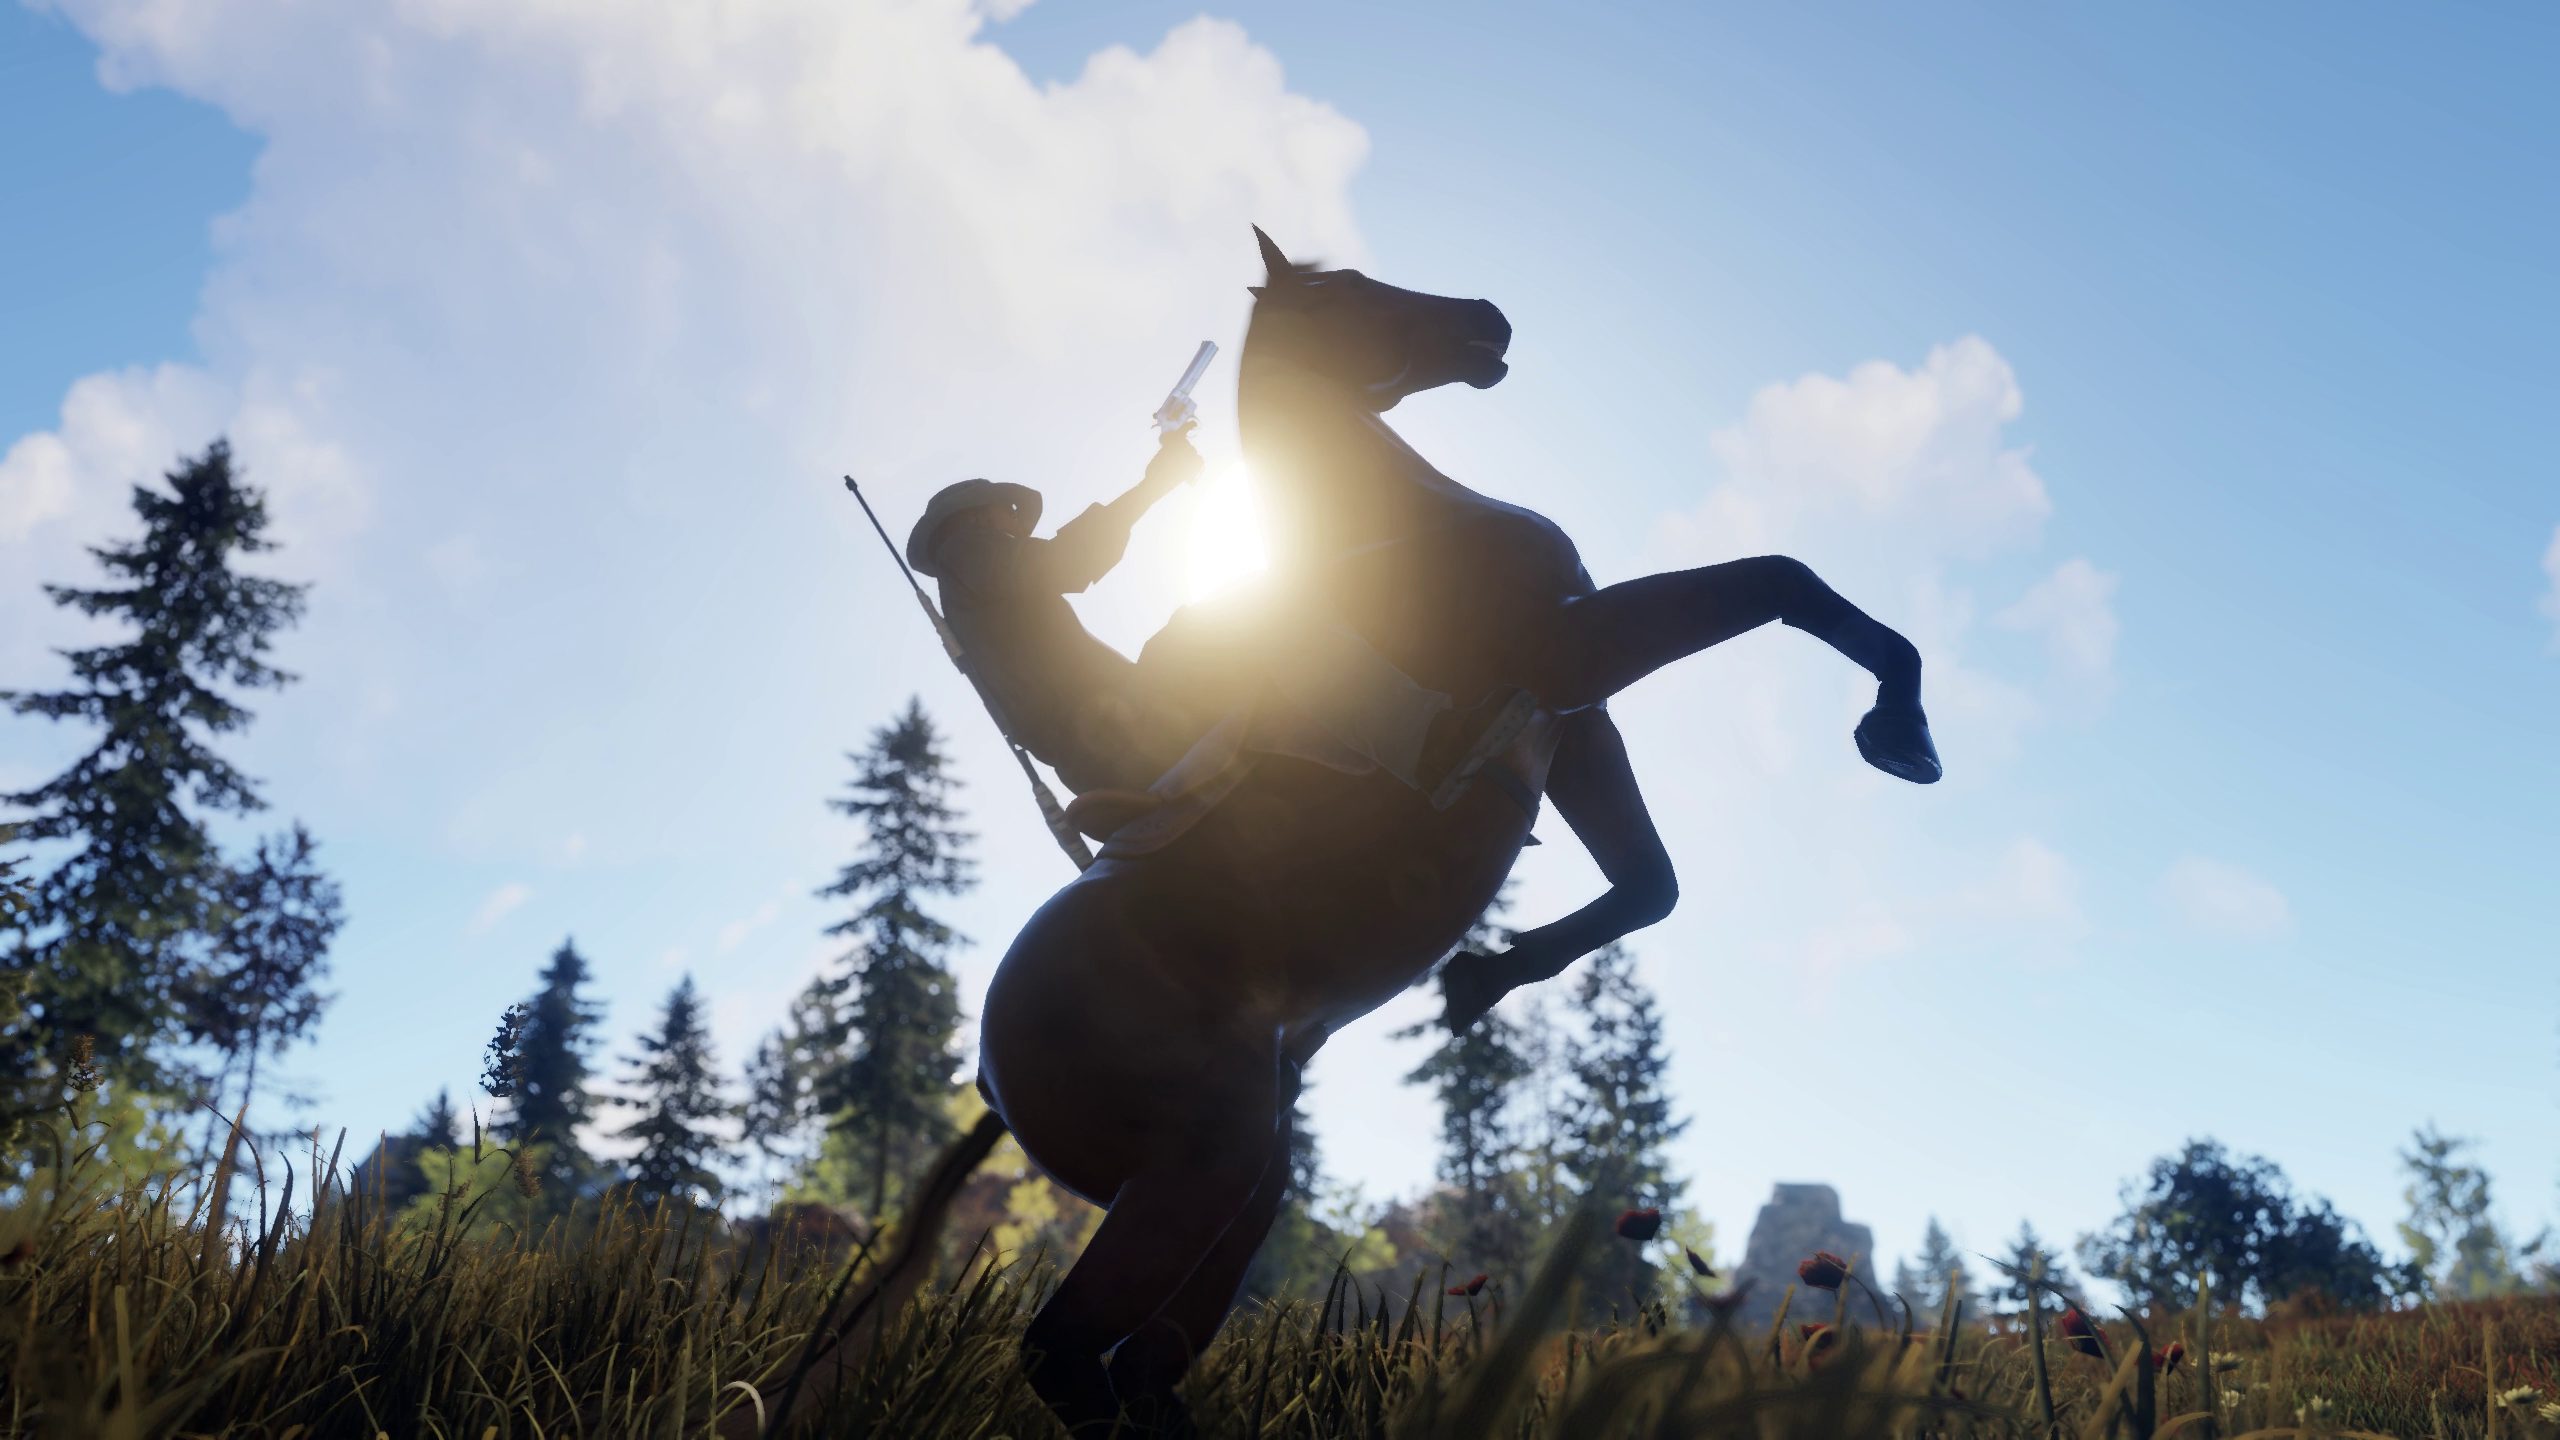 All information covering the horses in Rust